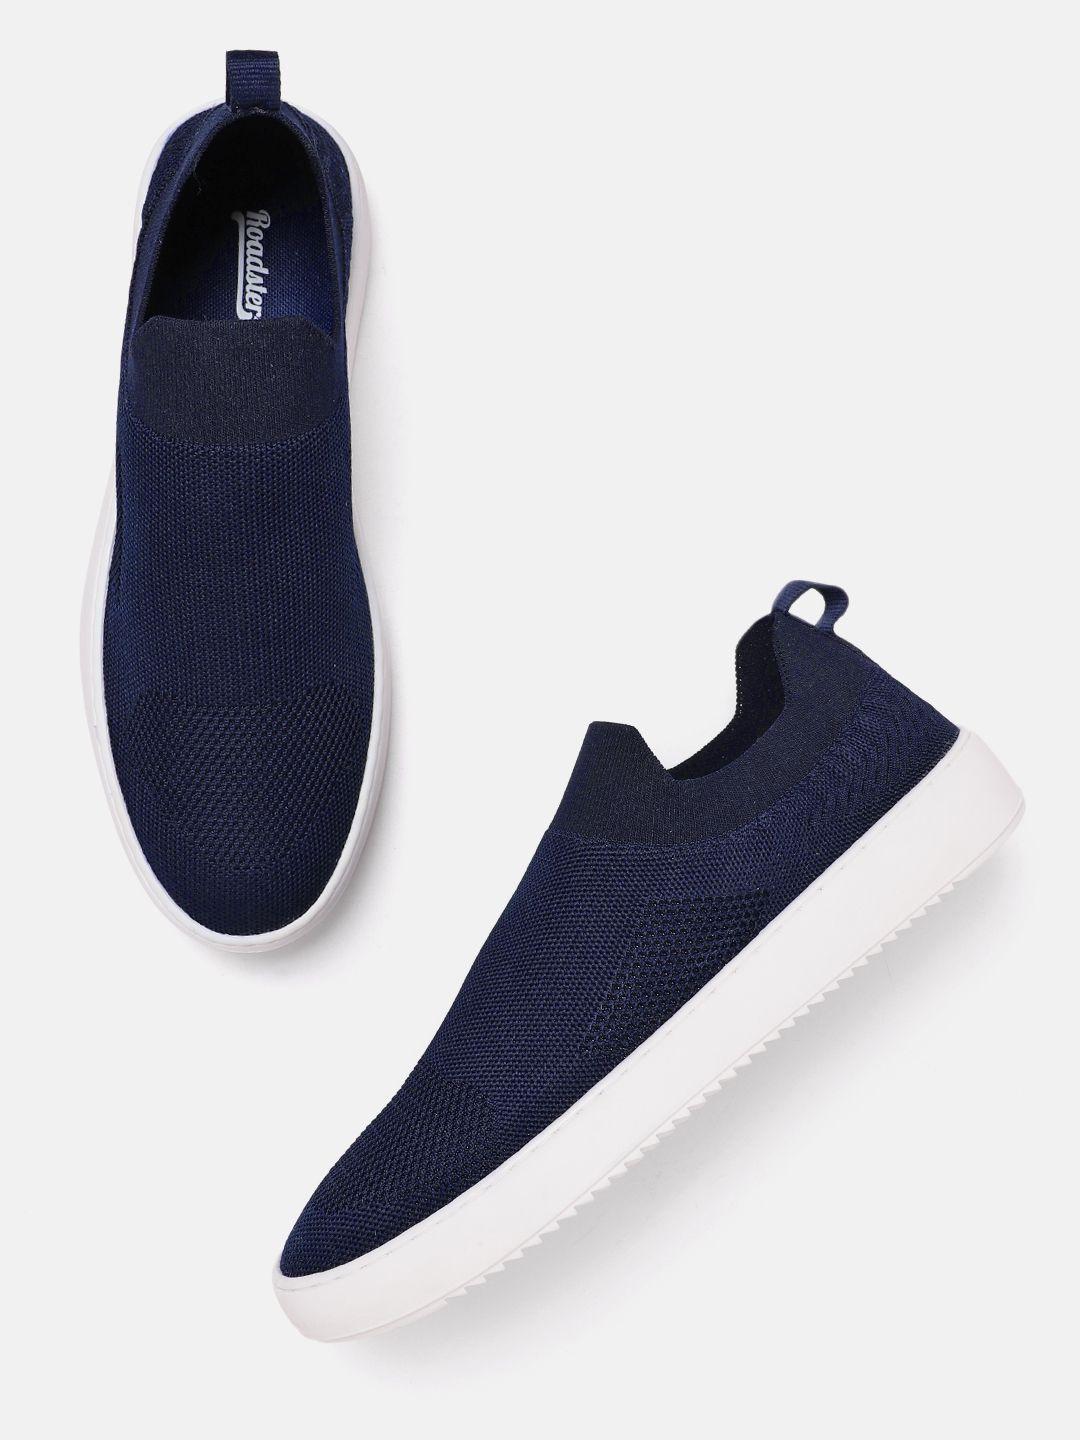 The Roadster Lifestyle Co. Men Woven Design Slip-On Sneakers